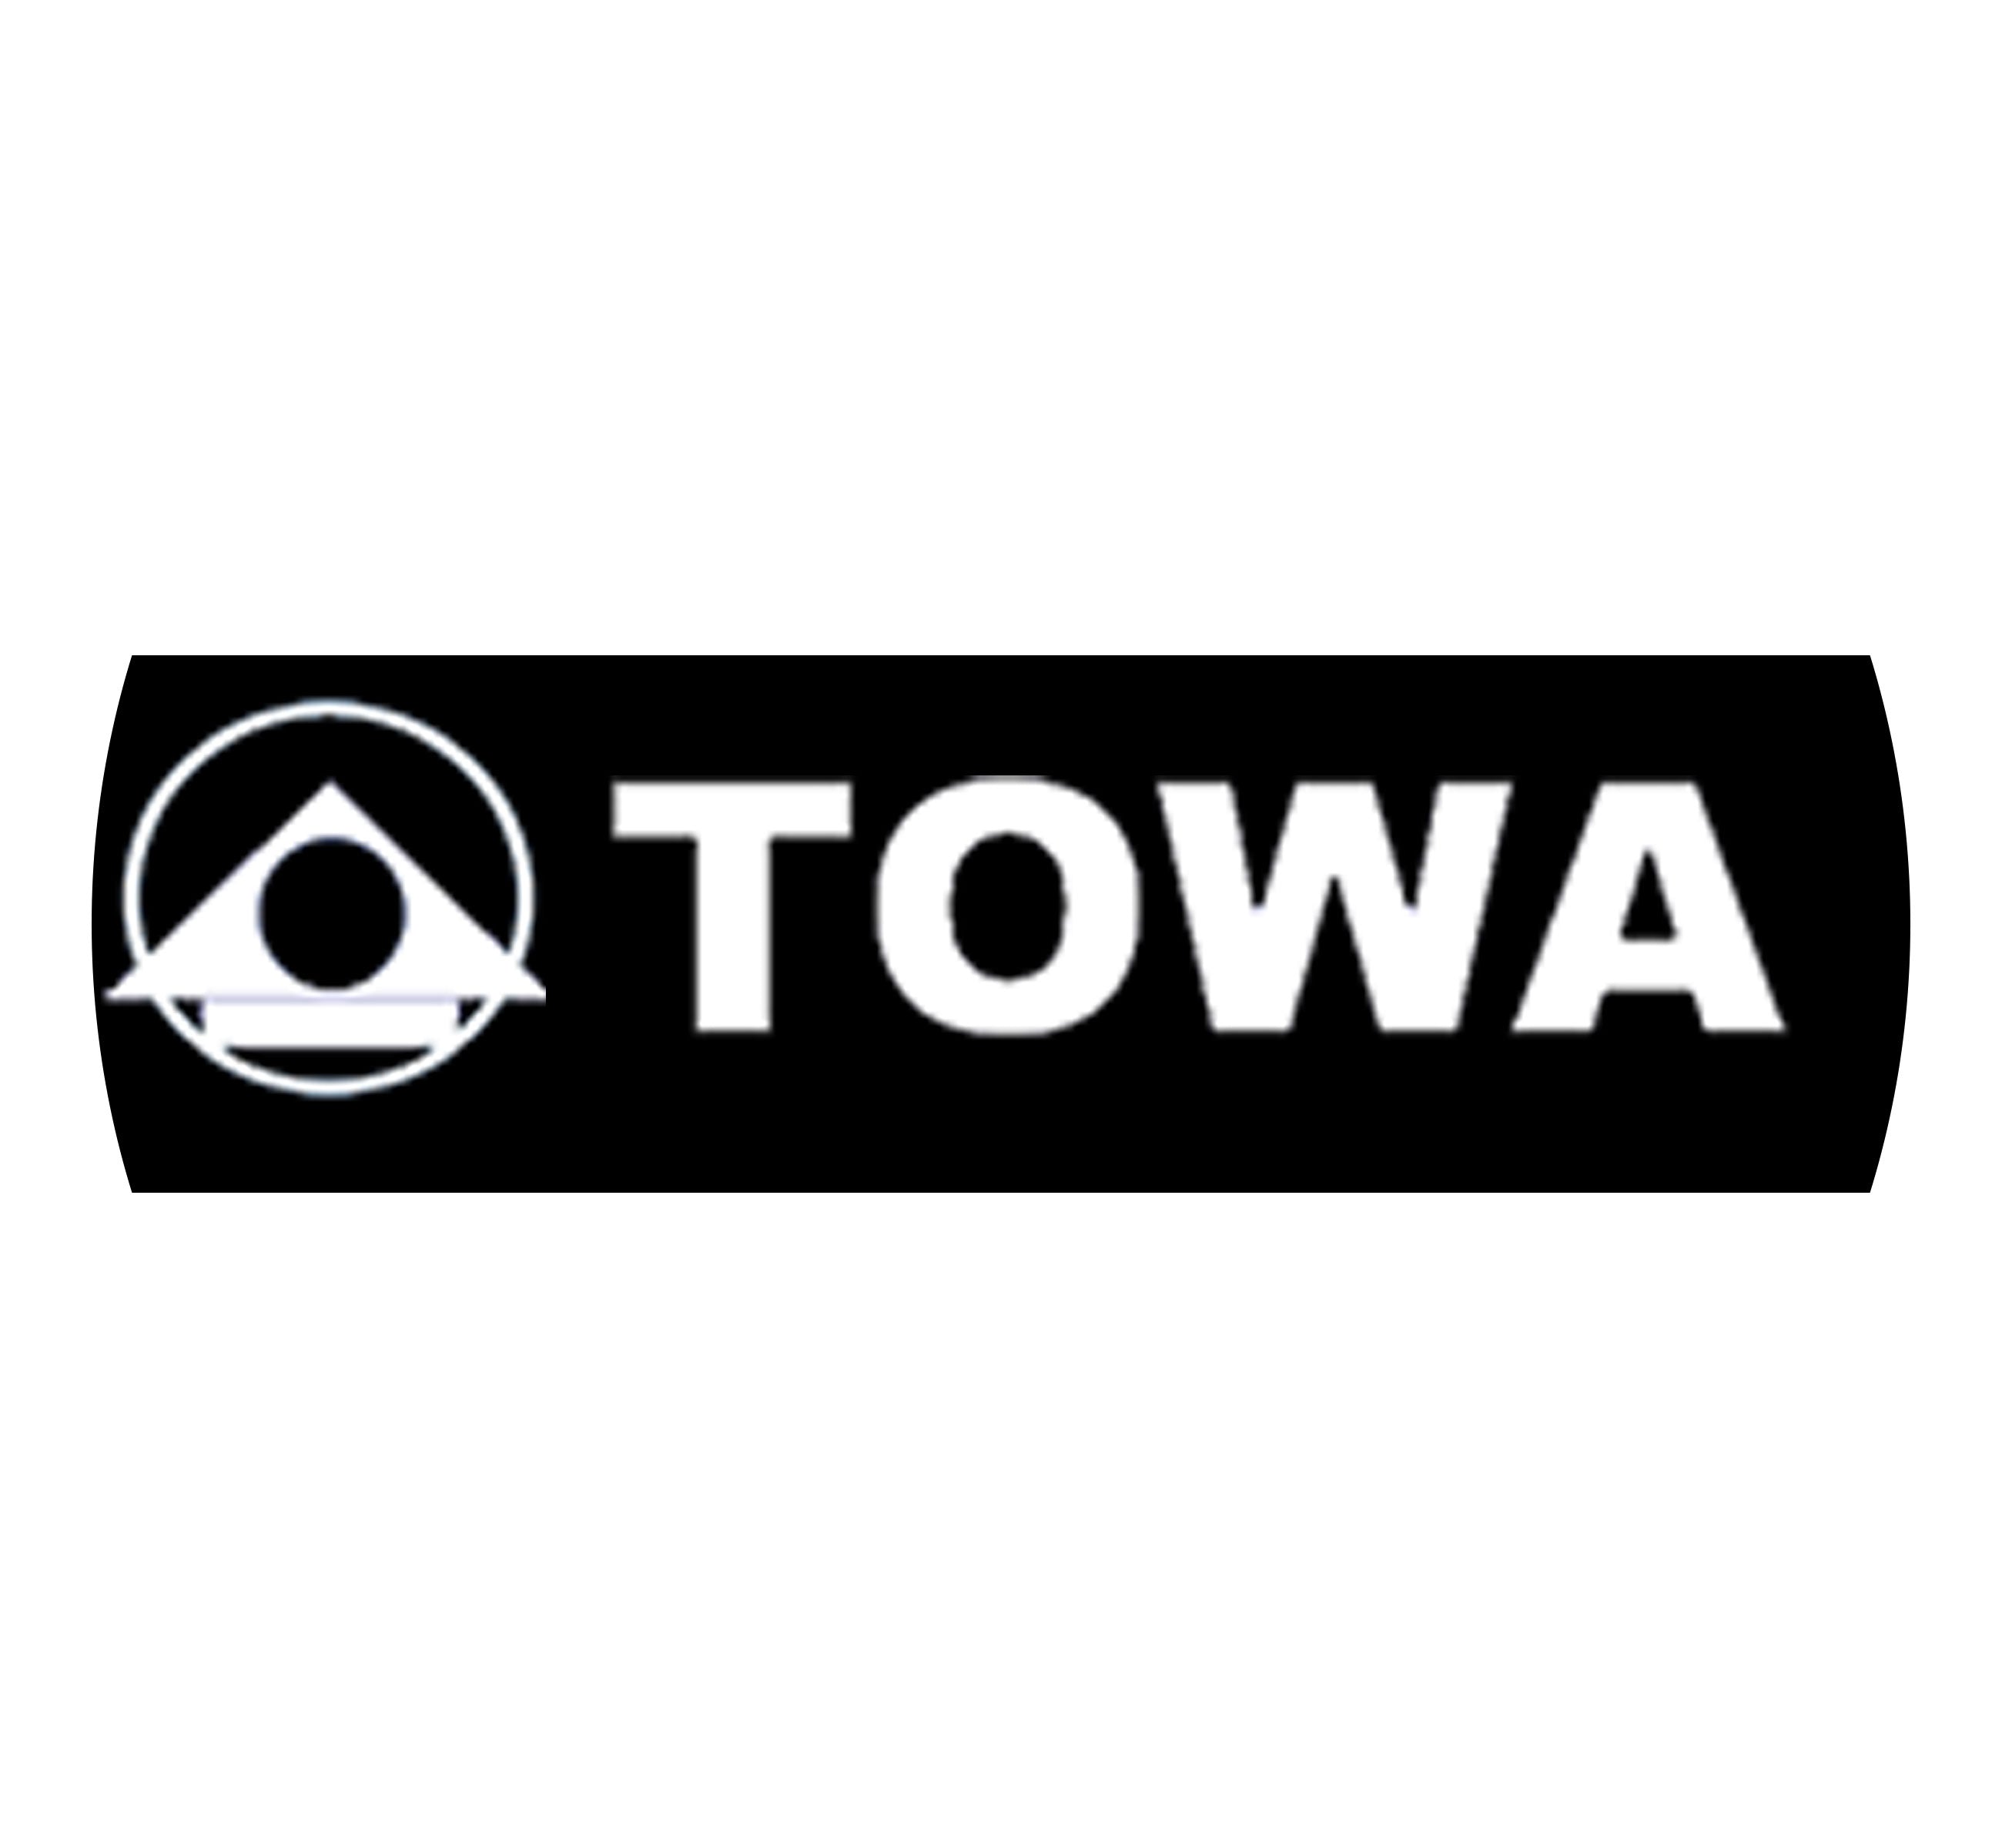 Towa Price Marking Labels and Labelers